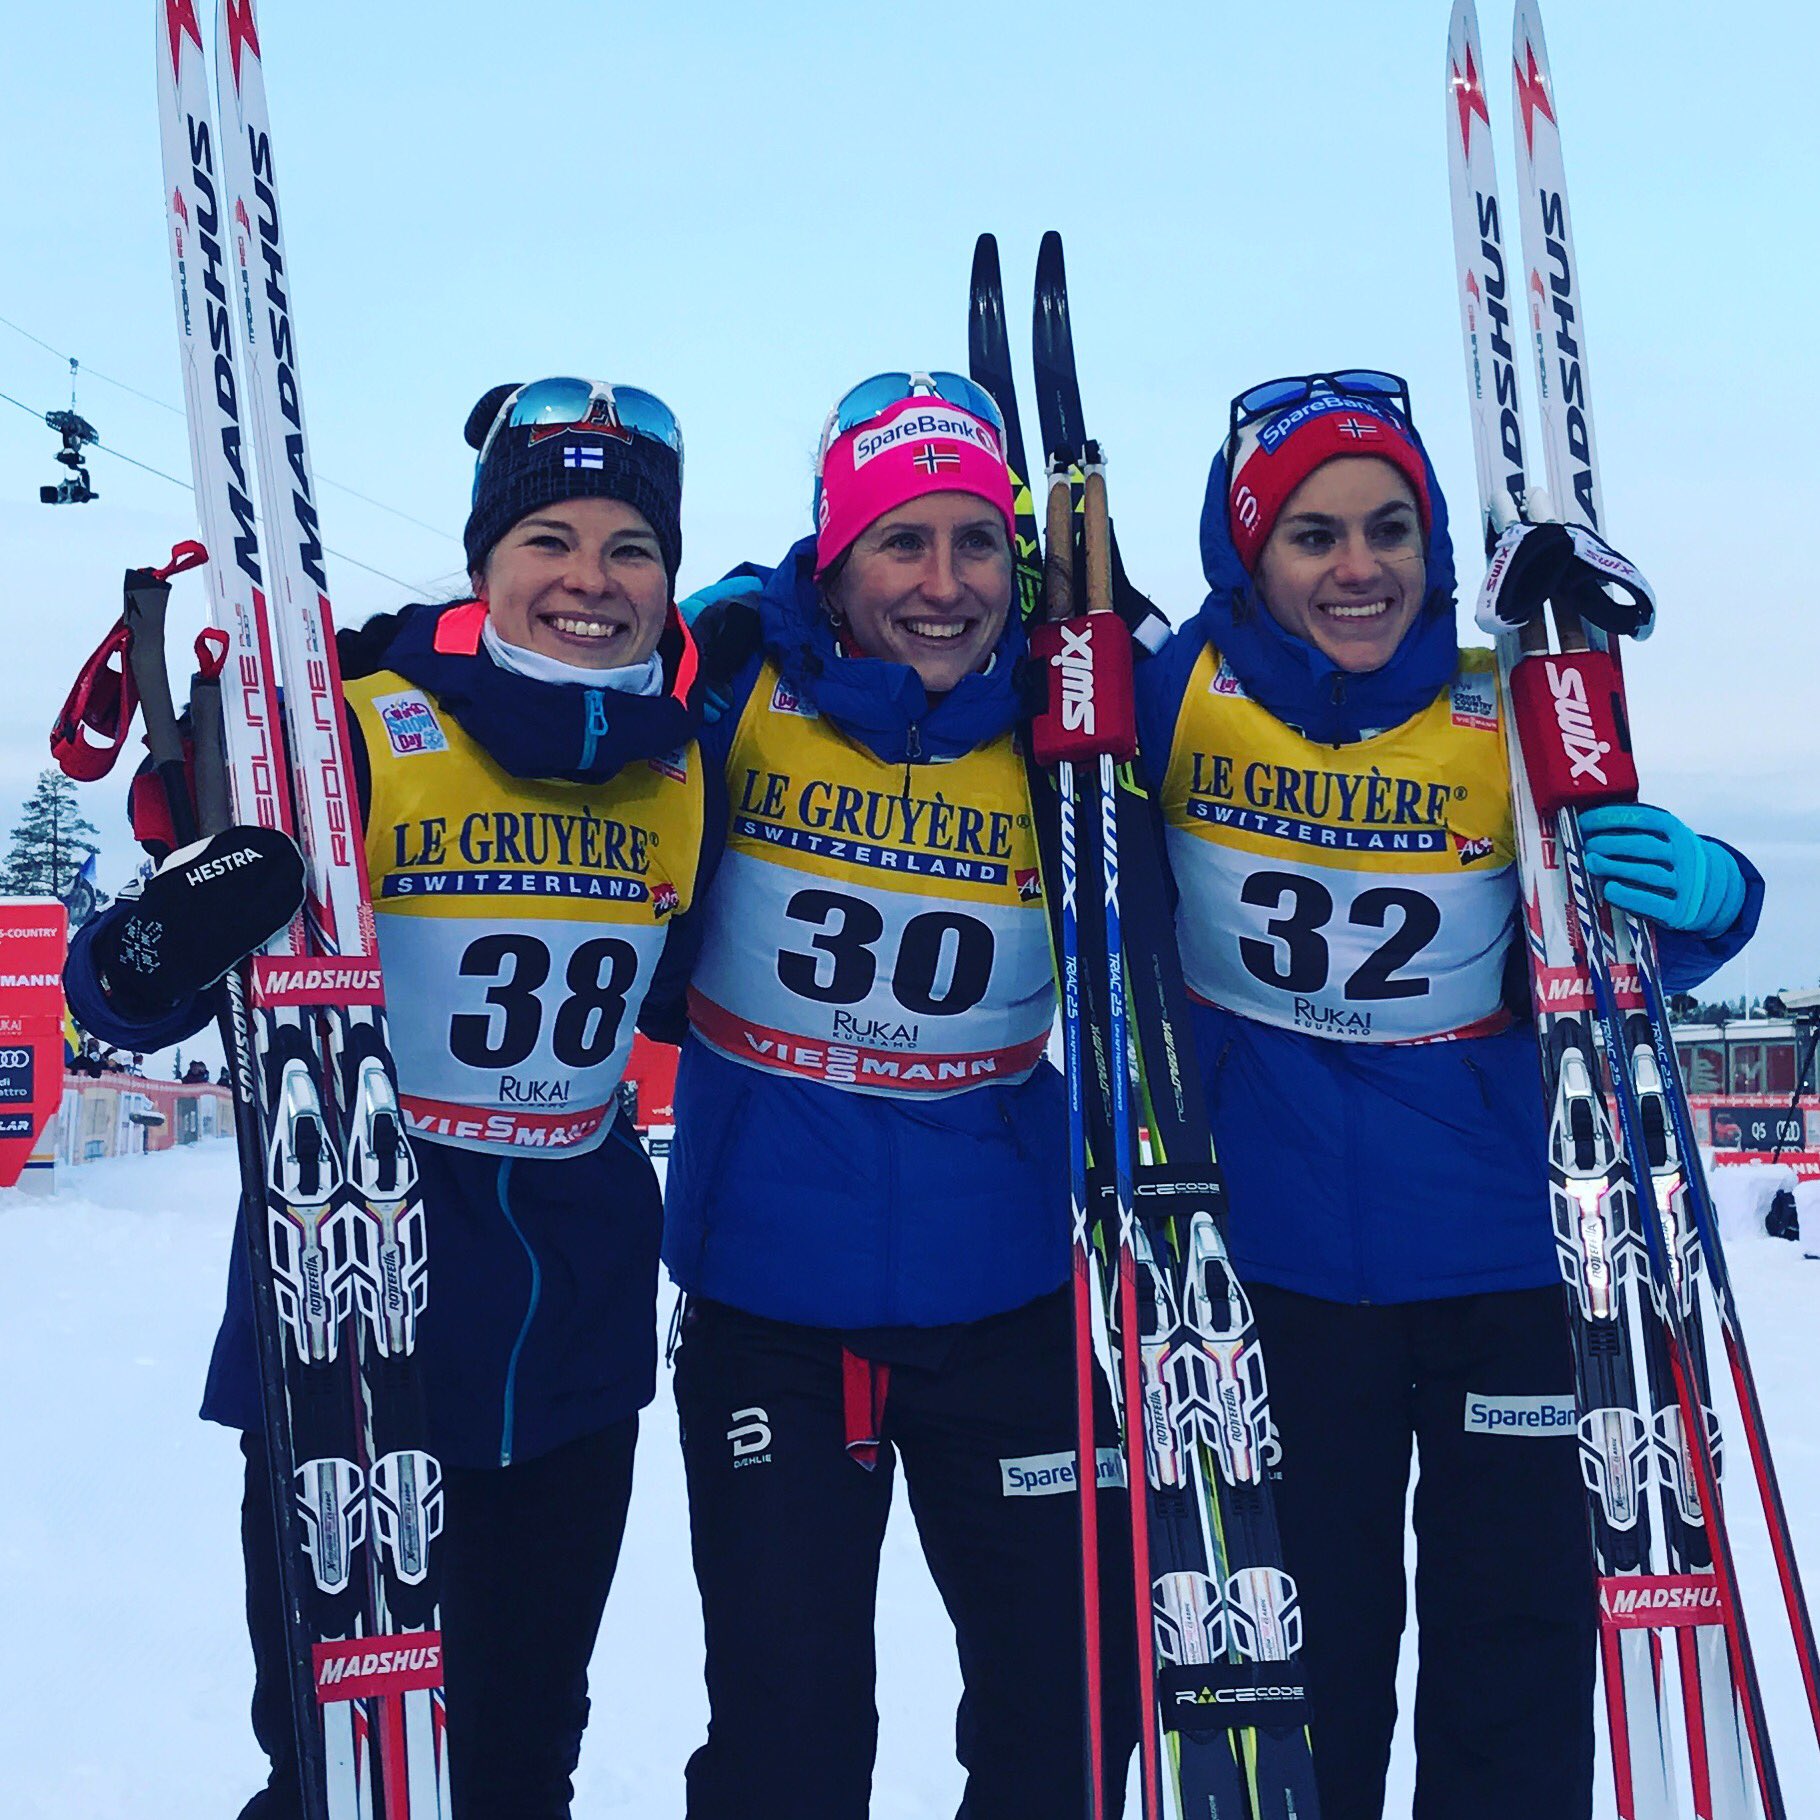 Marit Bjørgen of Norway (center) collected her first World Cup win of the season in the 10 k classic in Ruka, Finland, ahead of Finland's Krista Parmakoski (left) and Norway's Heidi Weng (right). (Photo: FIS Cross Country/Twitter)